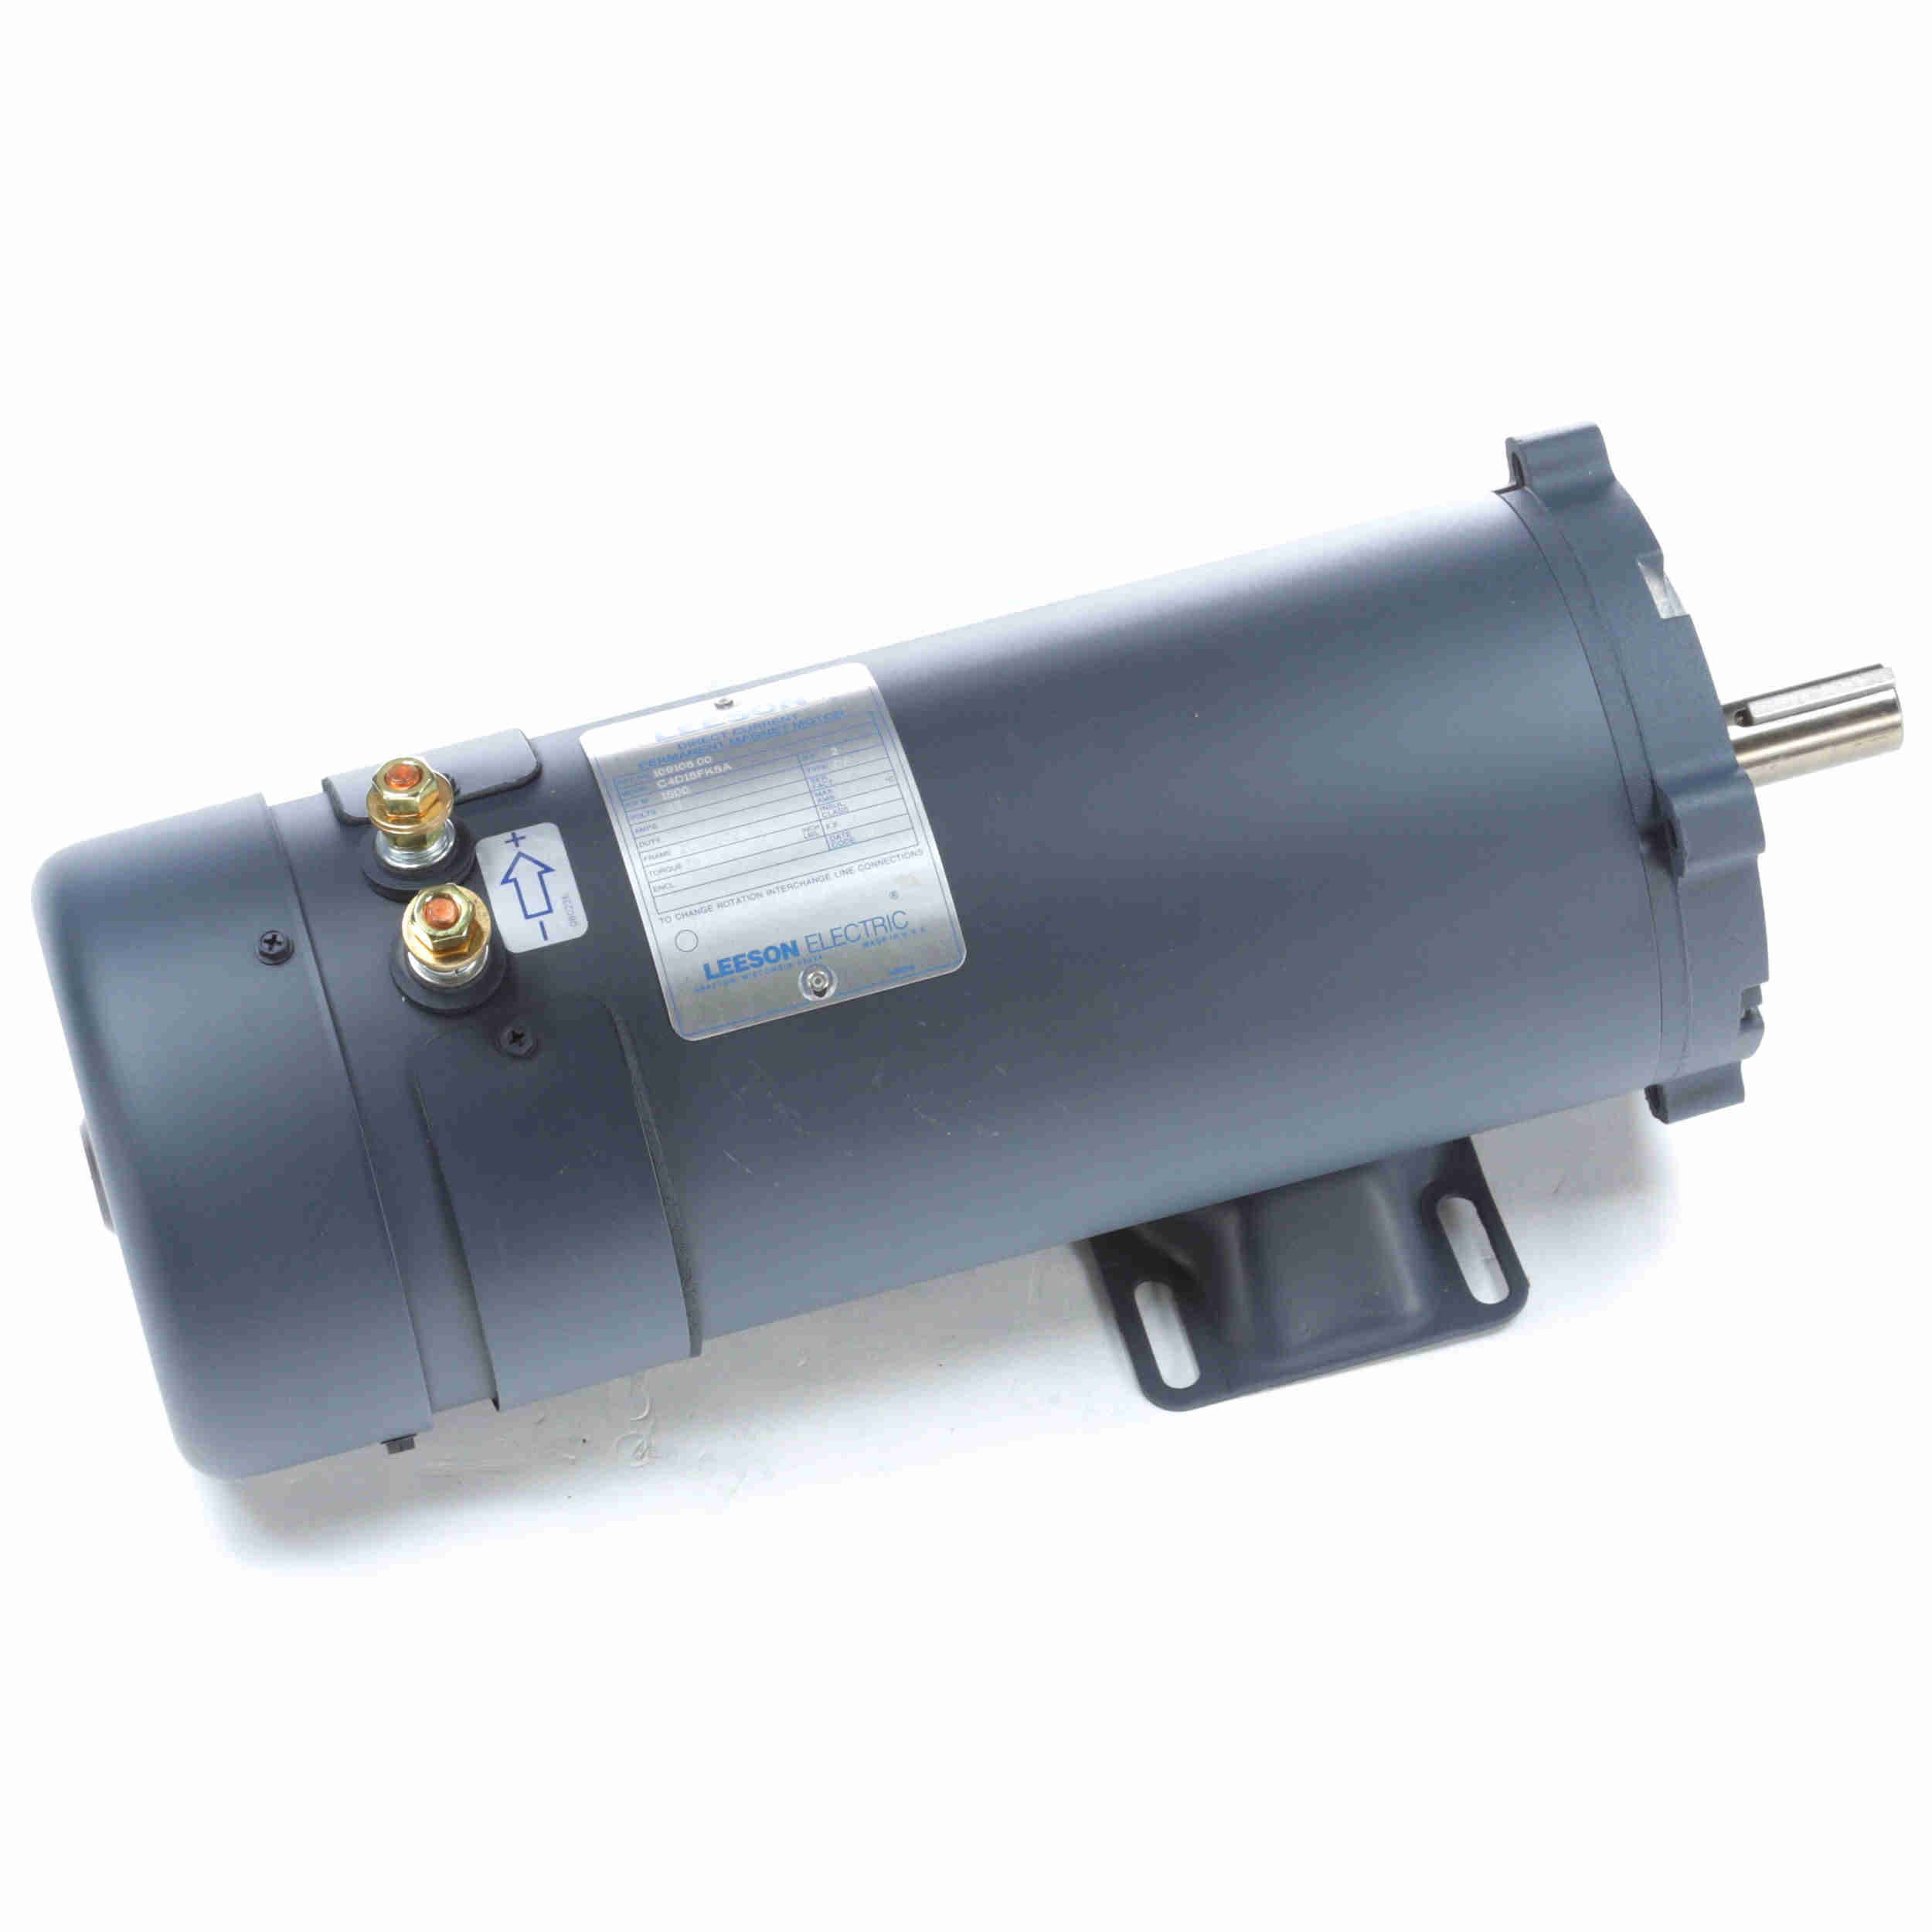 109108.00 Leeson 2HP Low Voltage DC Electric Motor, 1800RPM 3